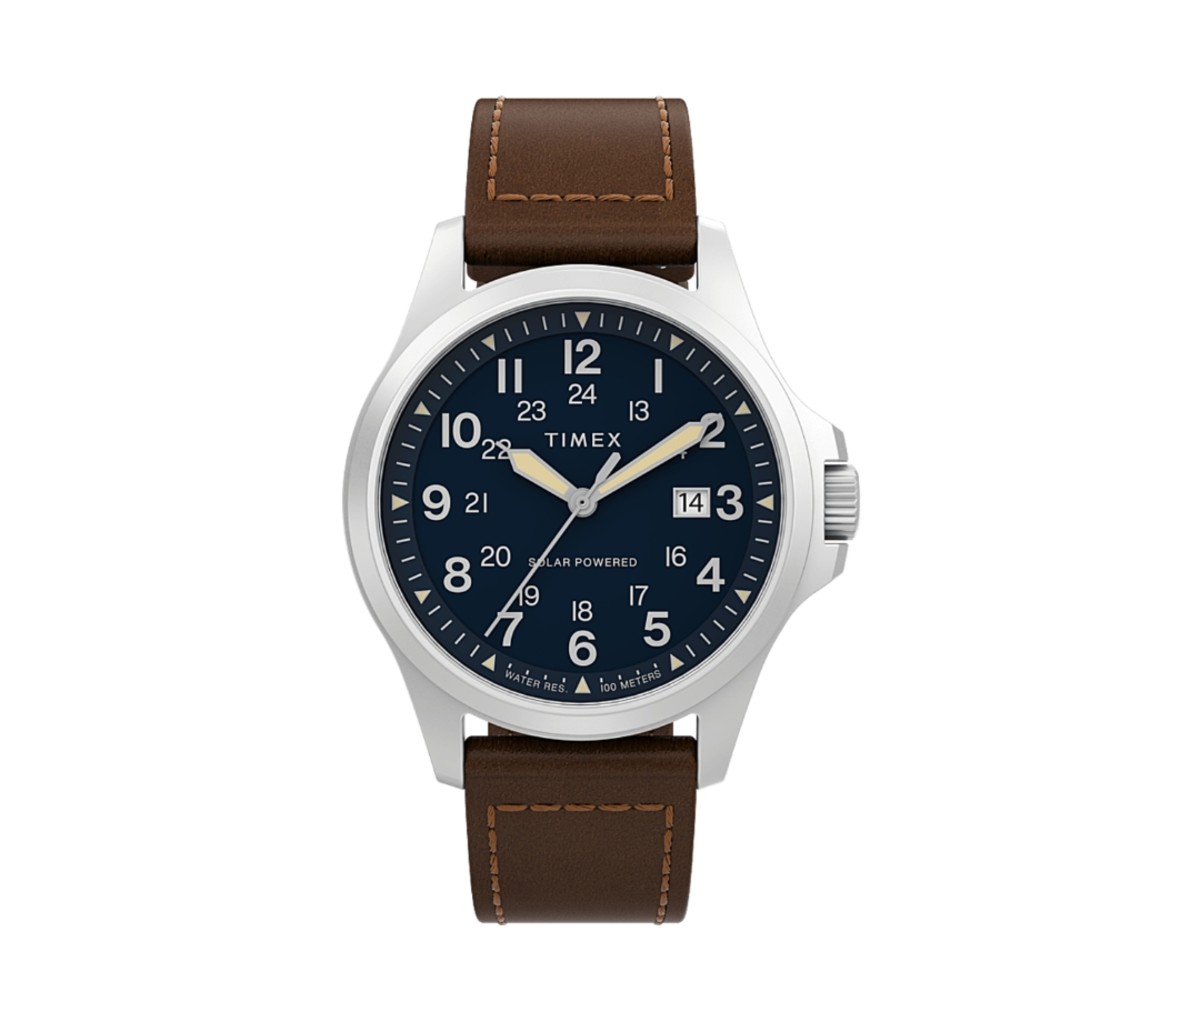 Timex Expedition North Field Post Solar 41mm Watch last-minute gifts